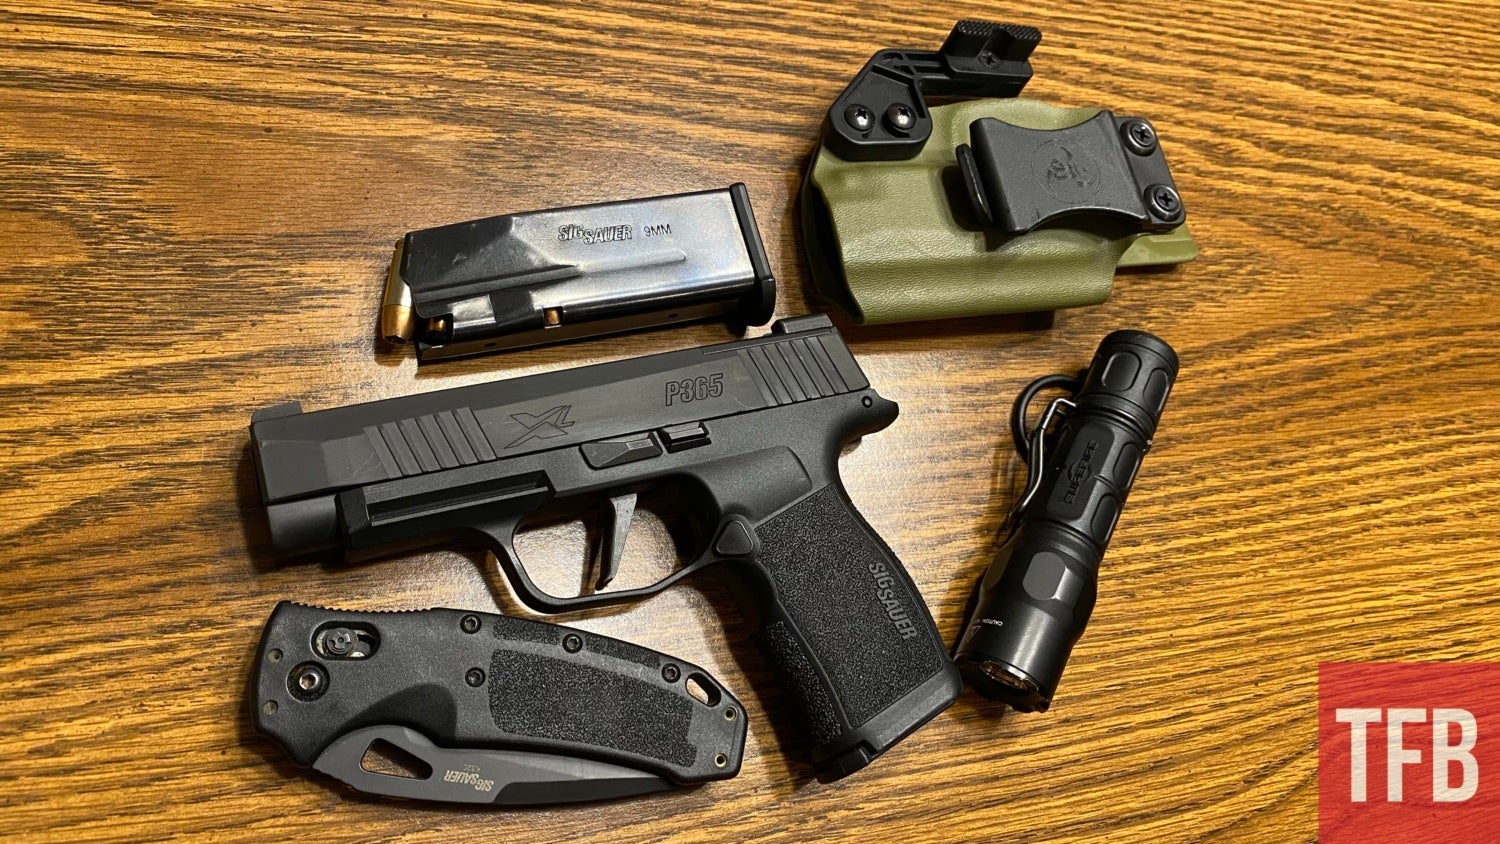 Concealed Carry Corner: Top 3 Tips To Easily Carry